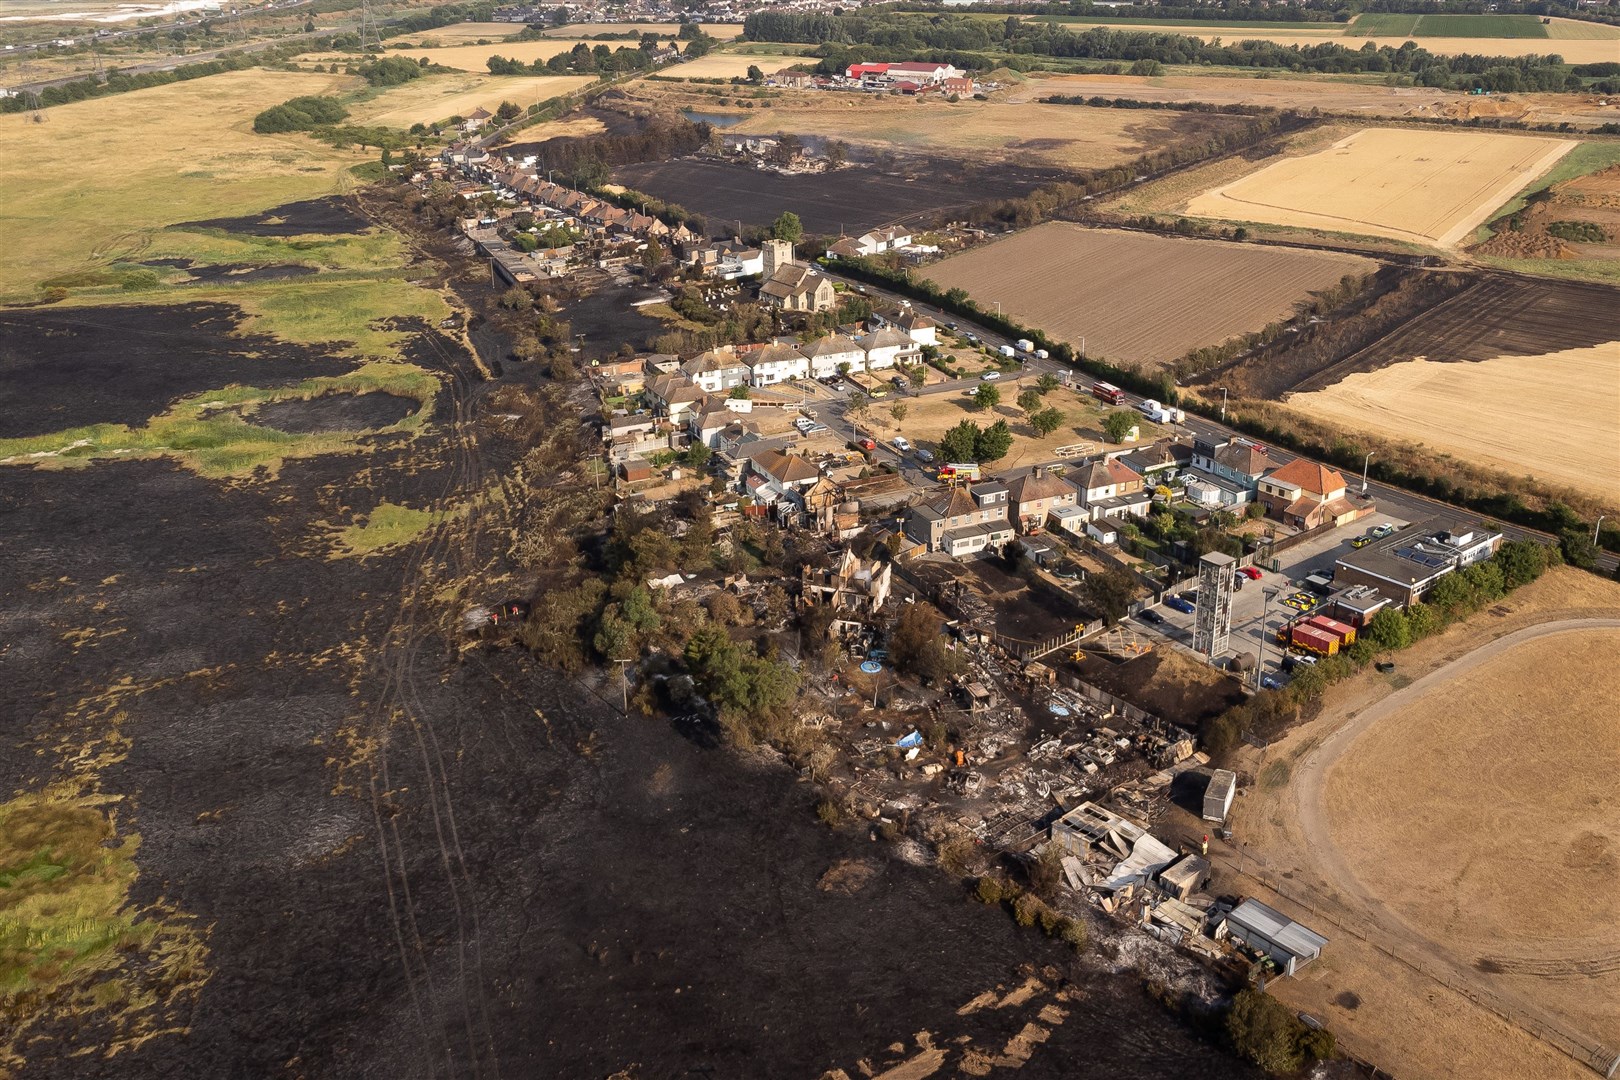 The scene after a blaze in the village of Wennington (Aaron Chown/PA)